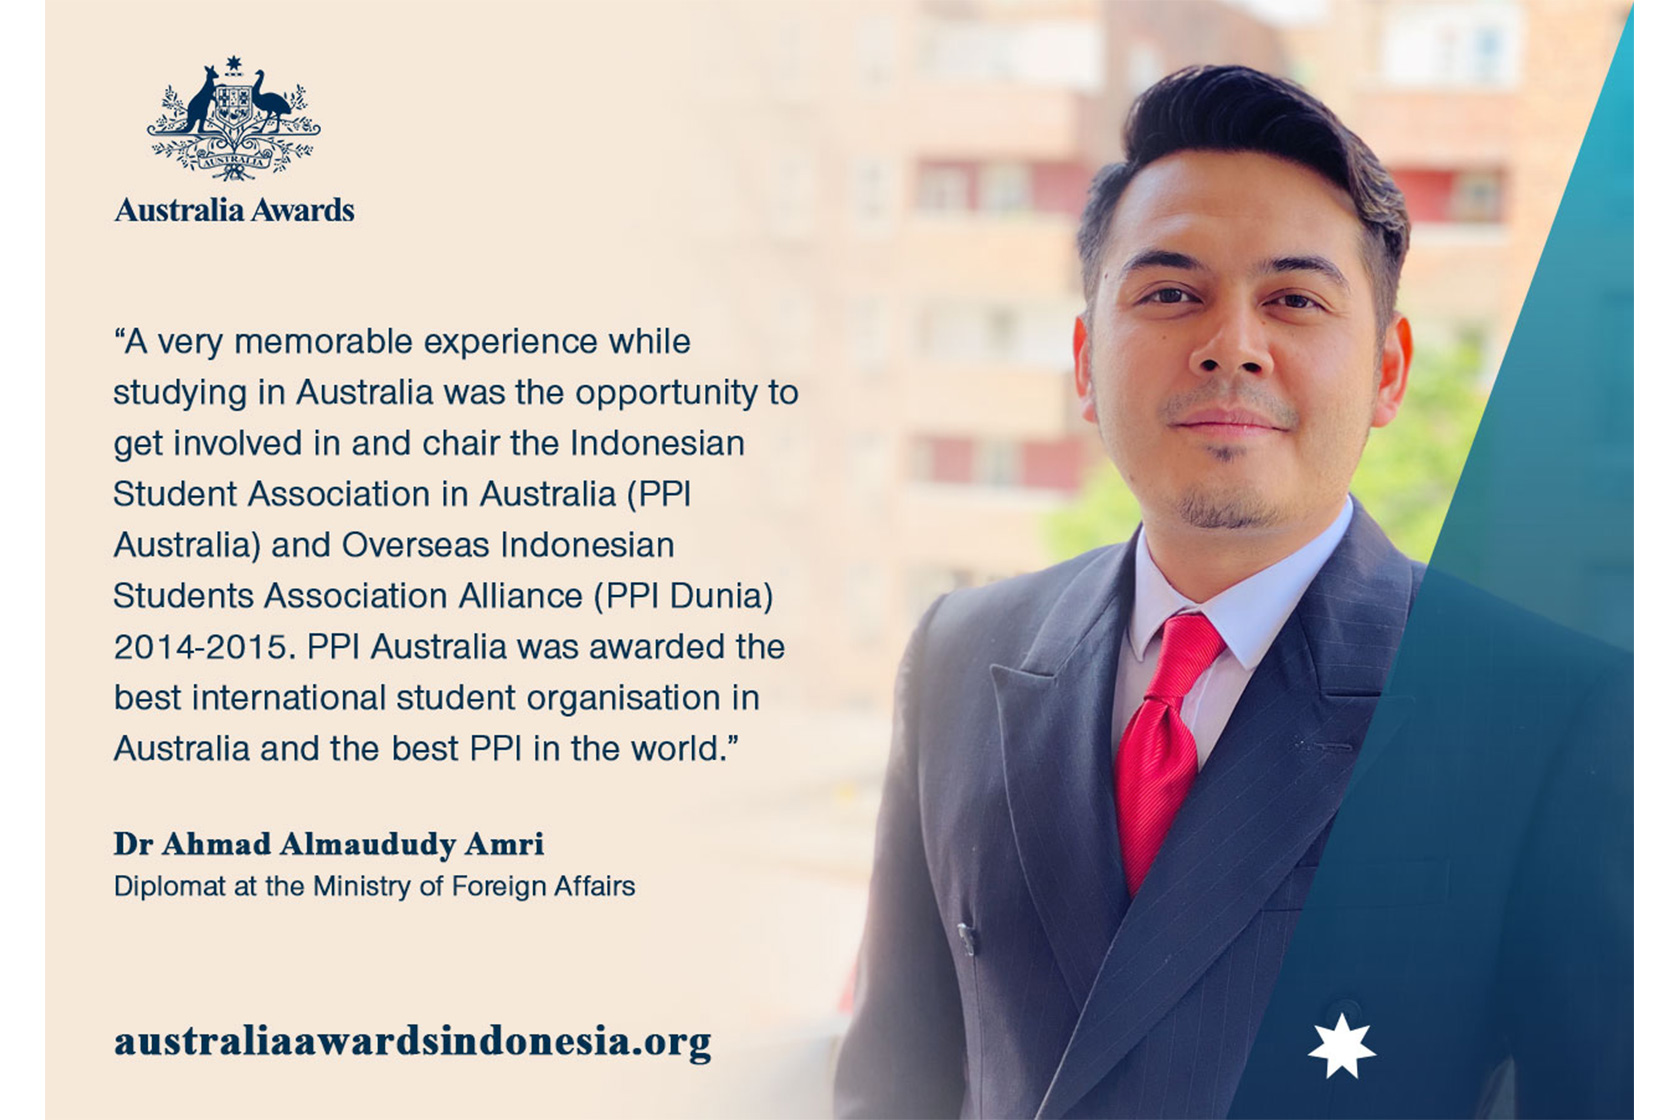 A testimonial from Dr Ahmad Almaududy Amri about his experience studying and living in Australia